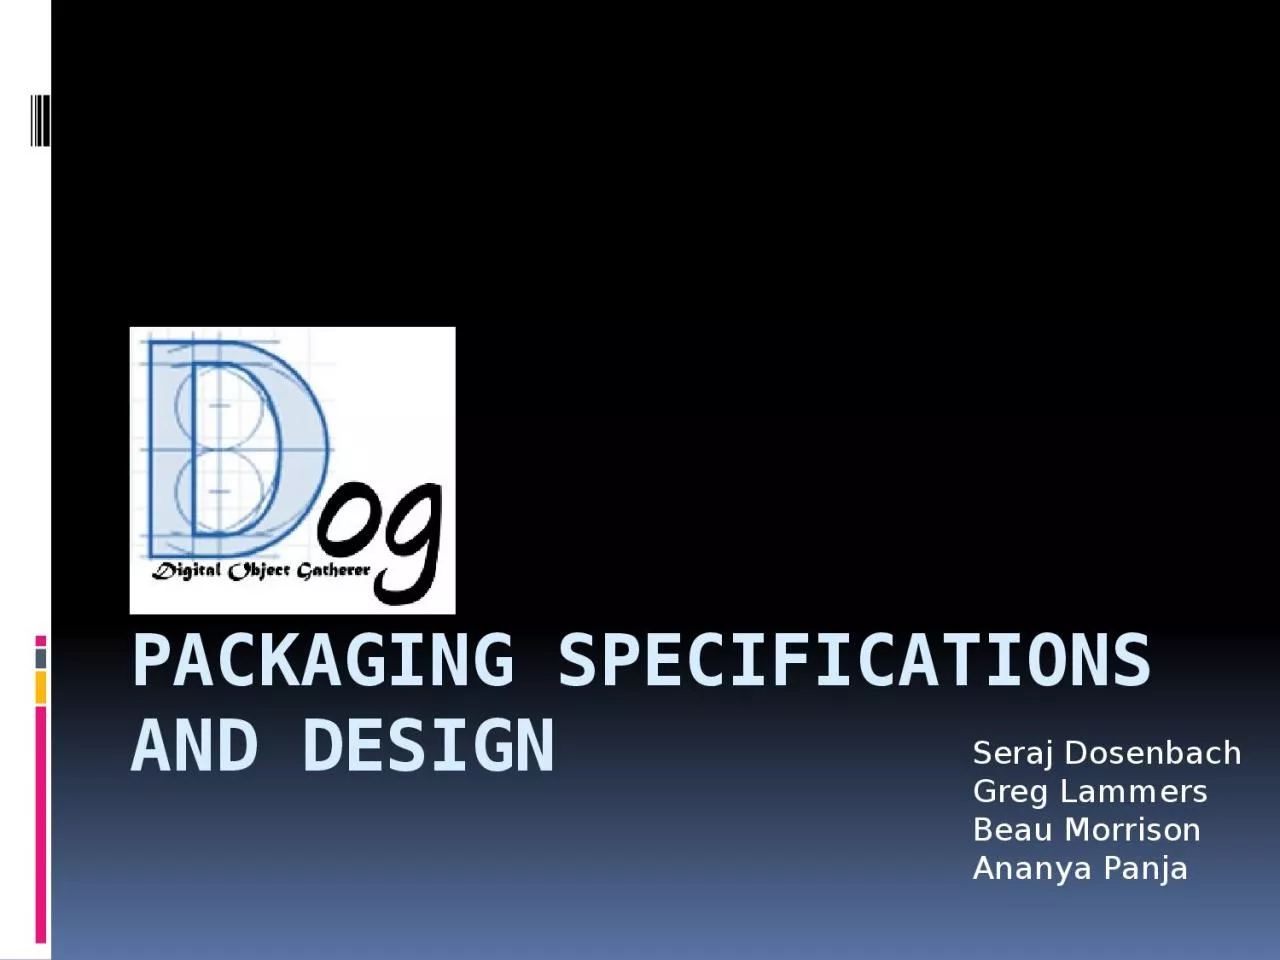 Packaging specifications and design